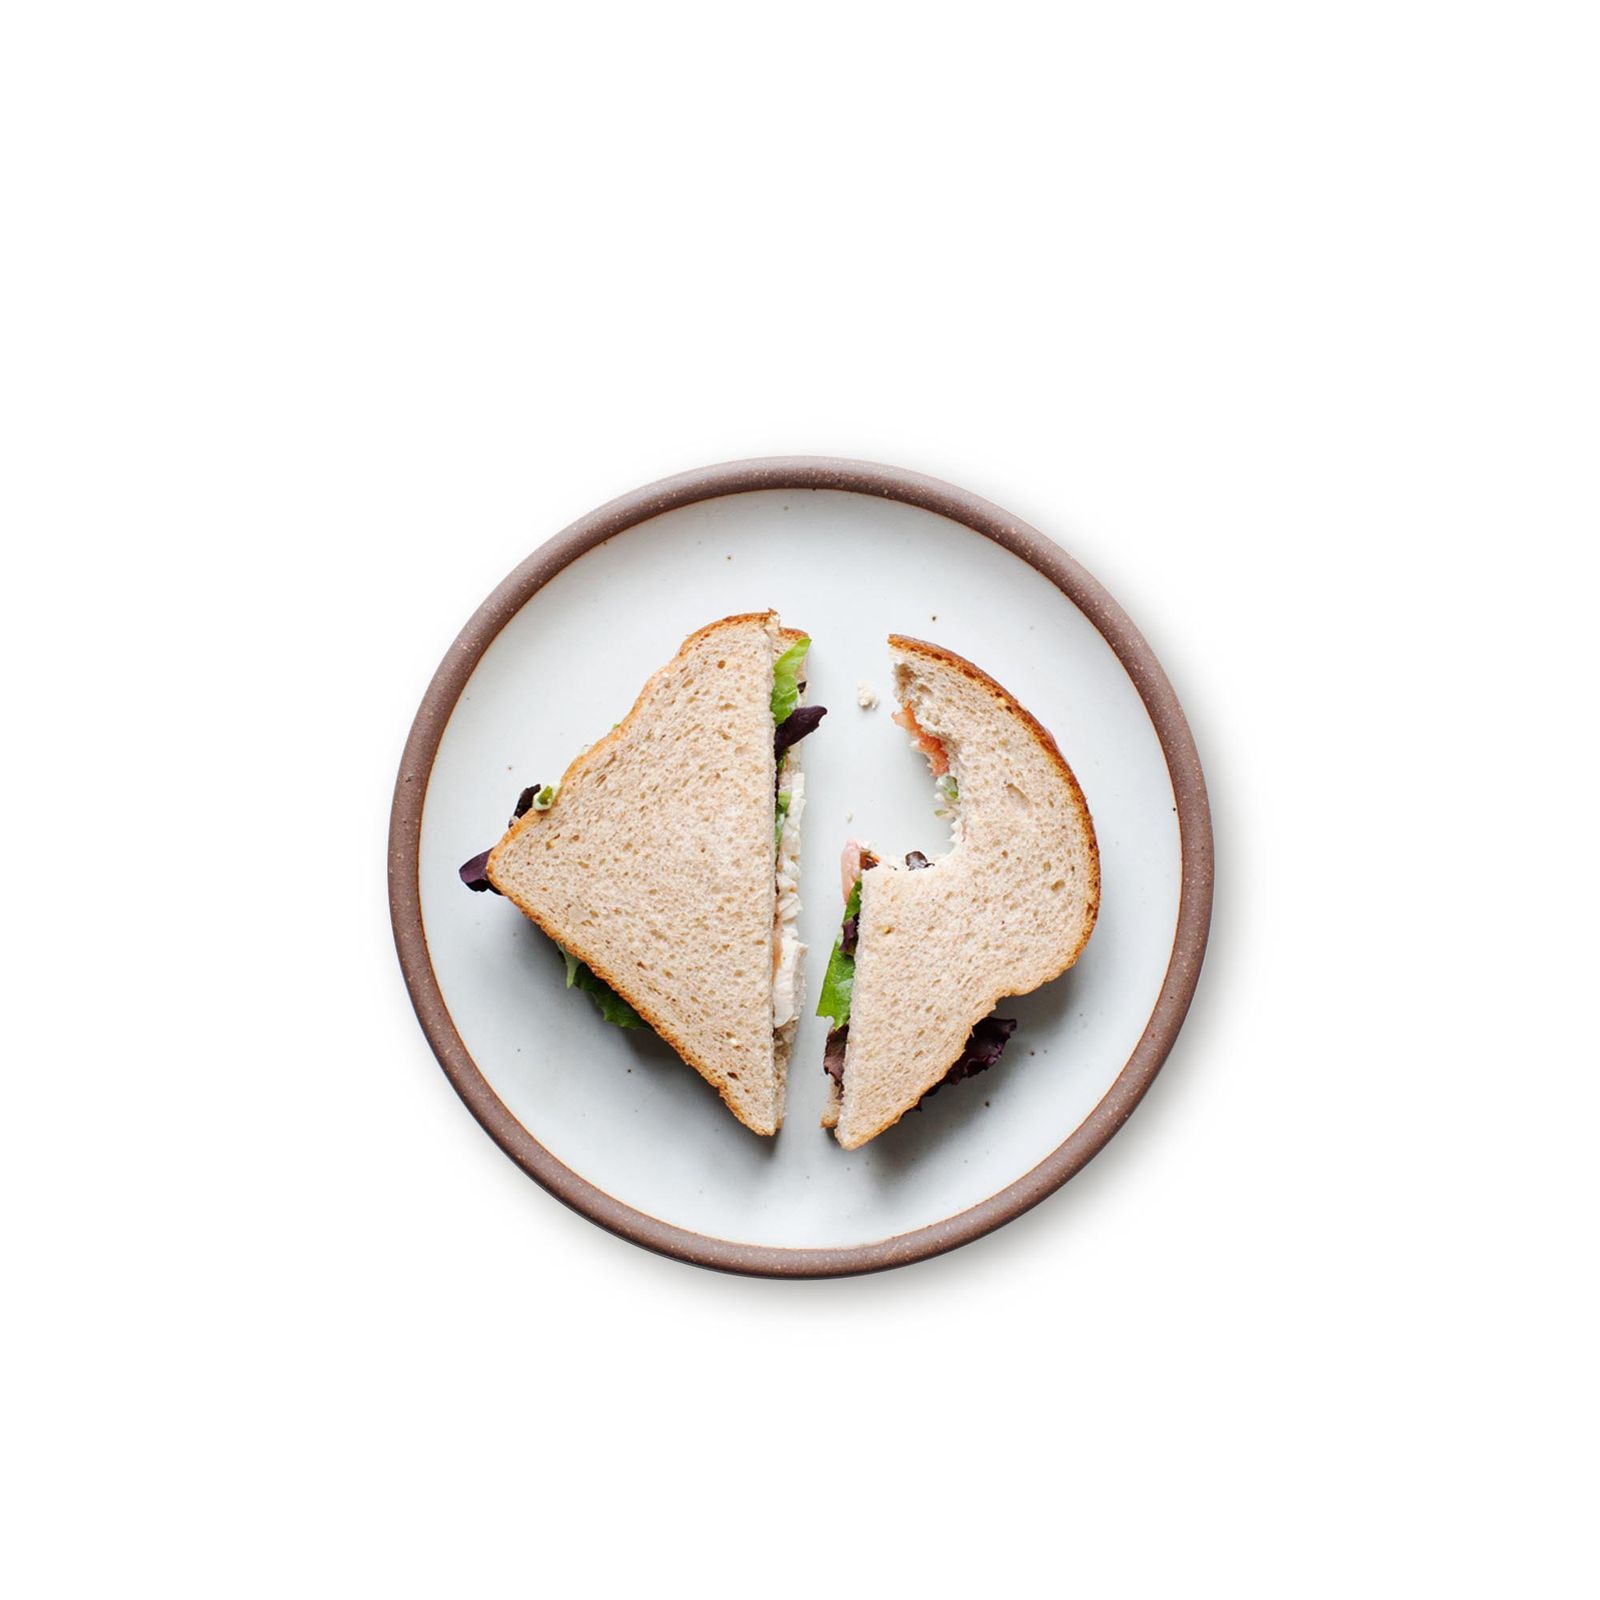 A side plate with a turkey, lettuce, tomato sandwich, cut diagonally, with a bite missing from one half.